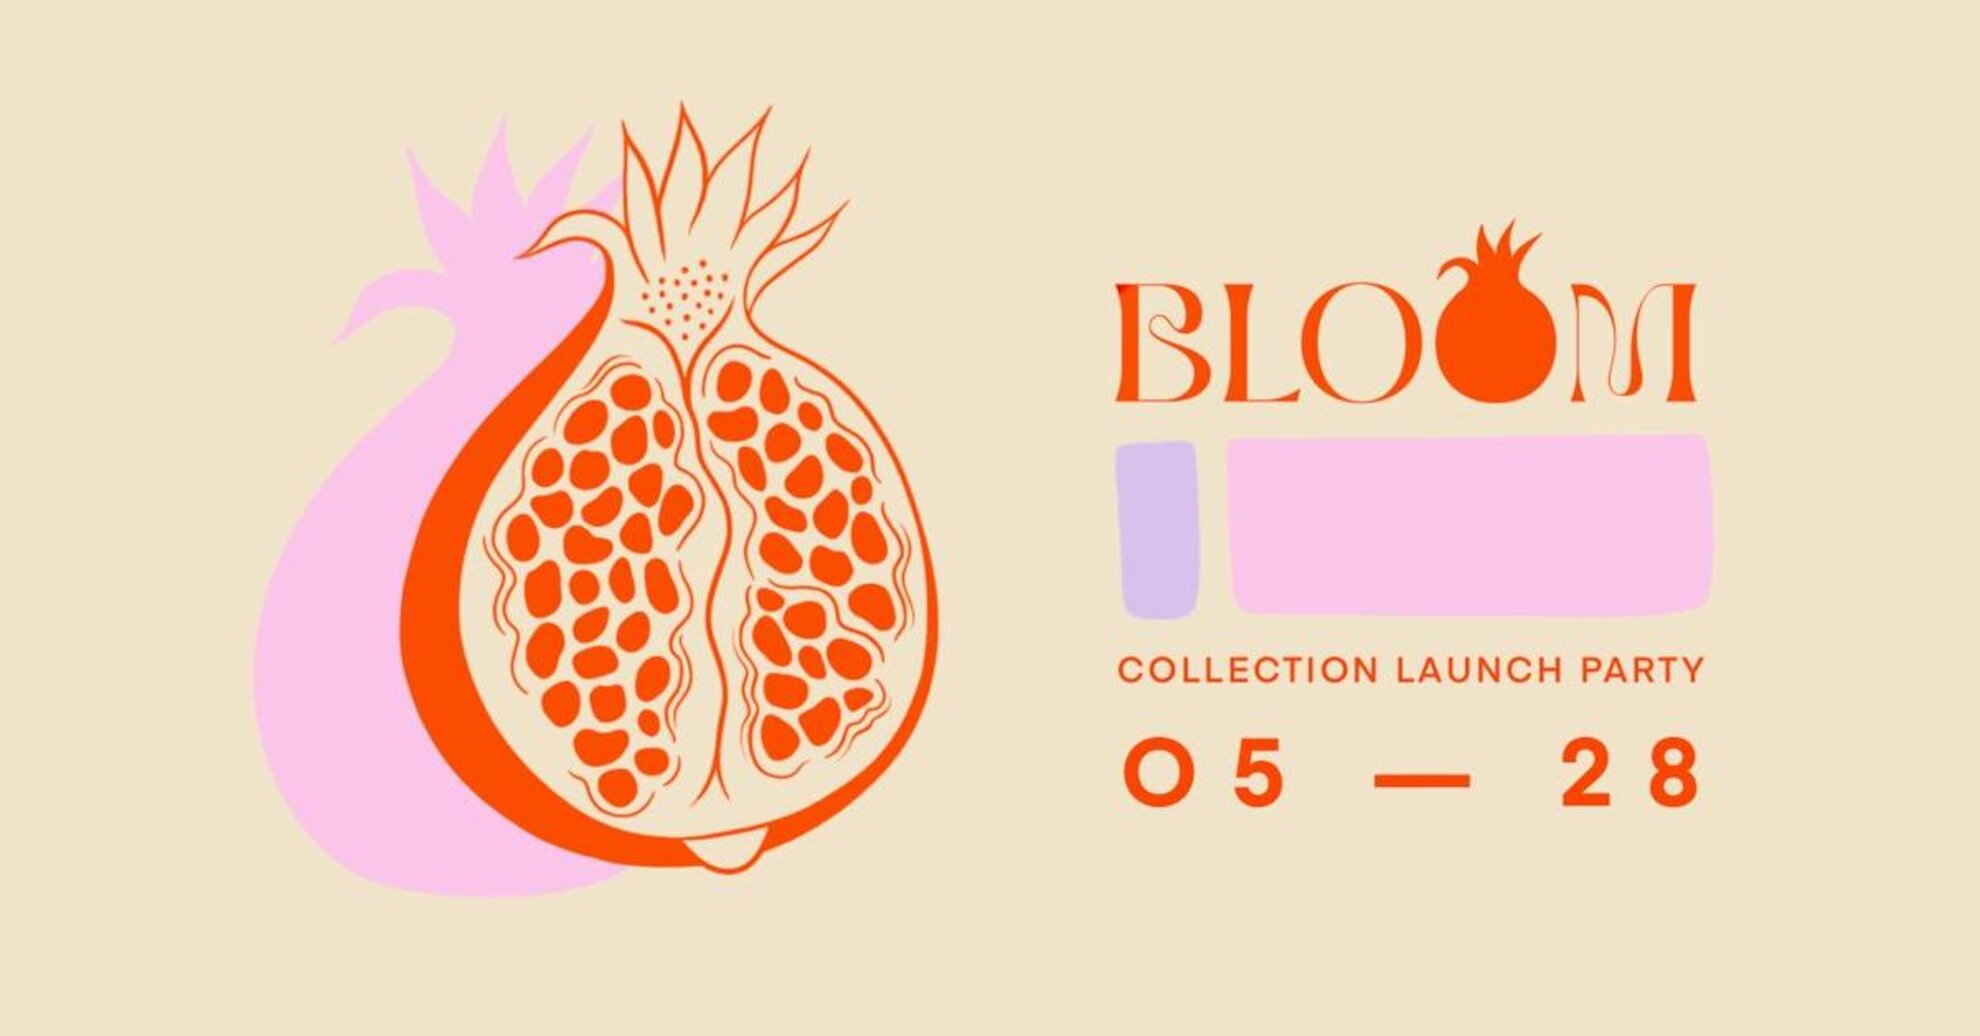 LUNAR – collection launch party